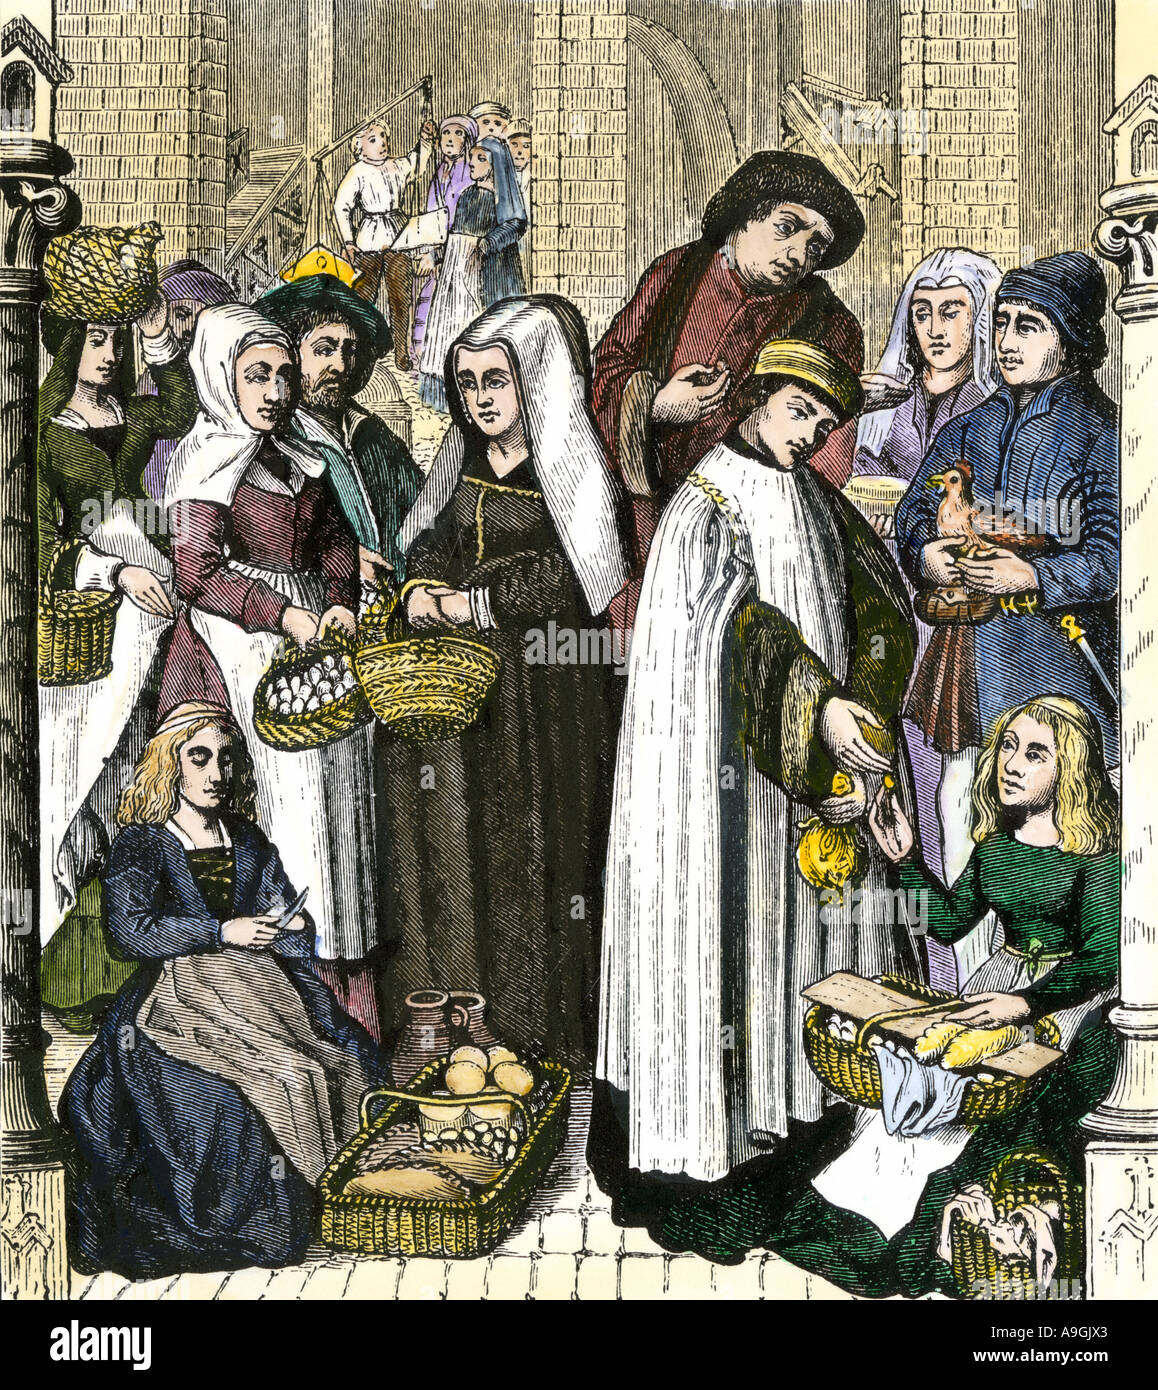 The Clergy in the Middle Ages